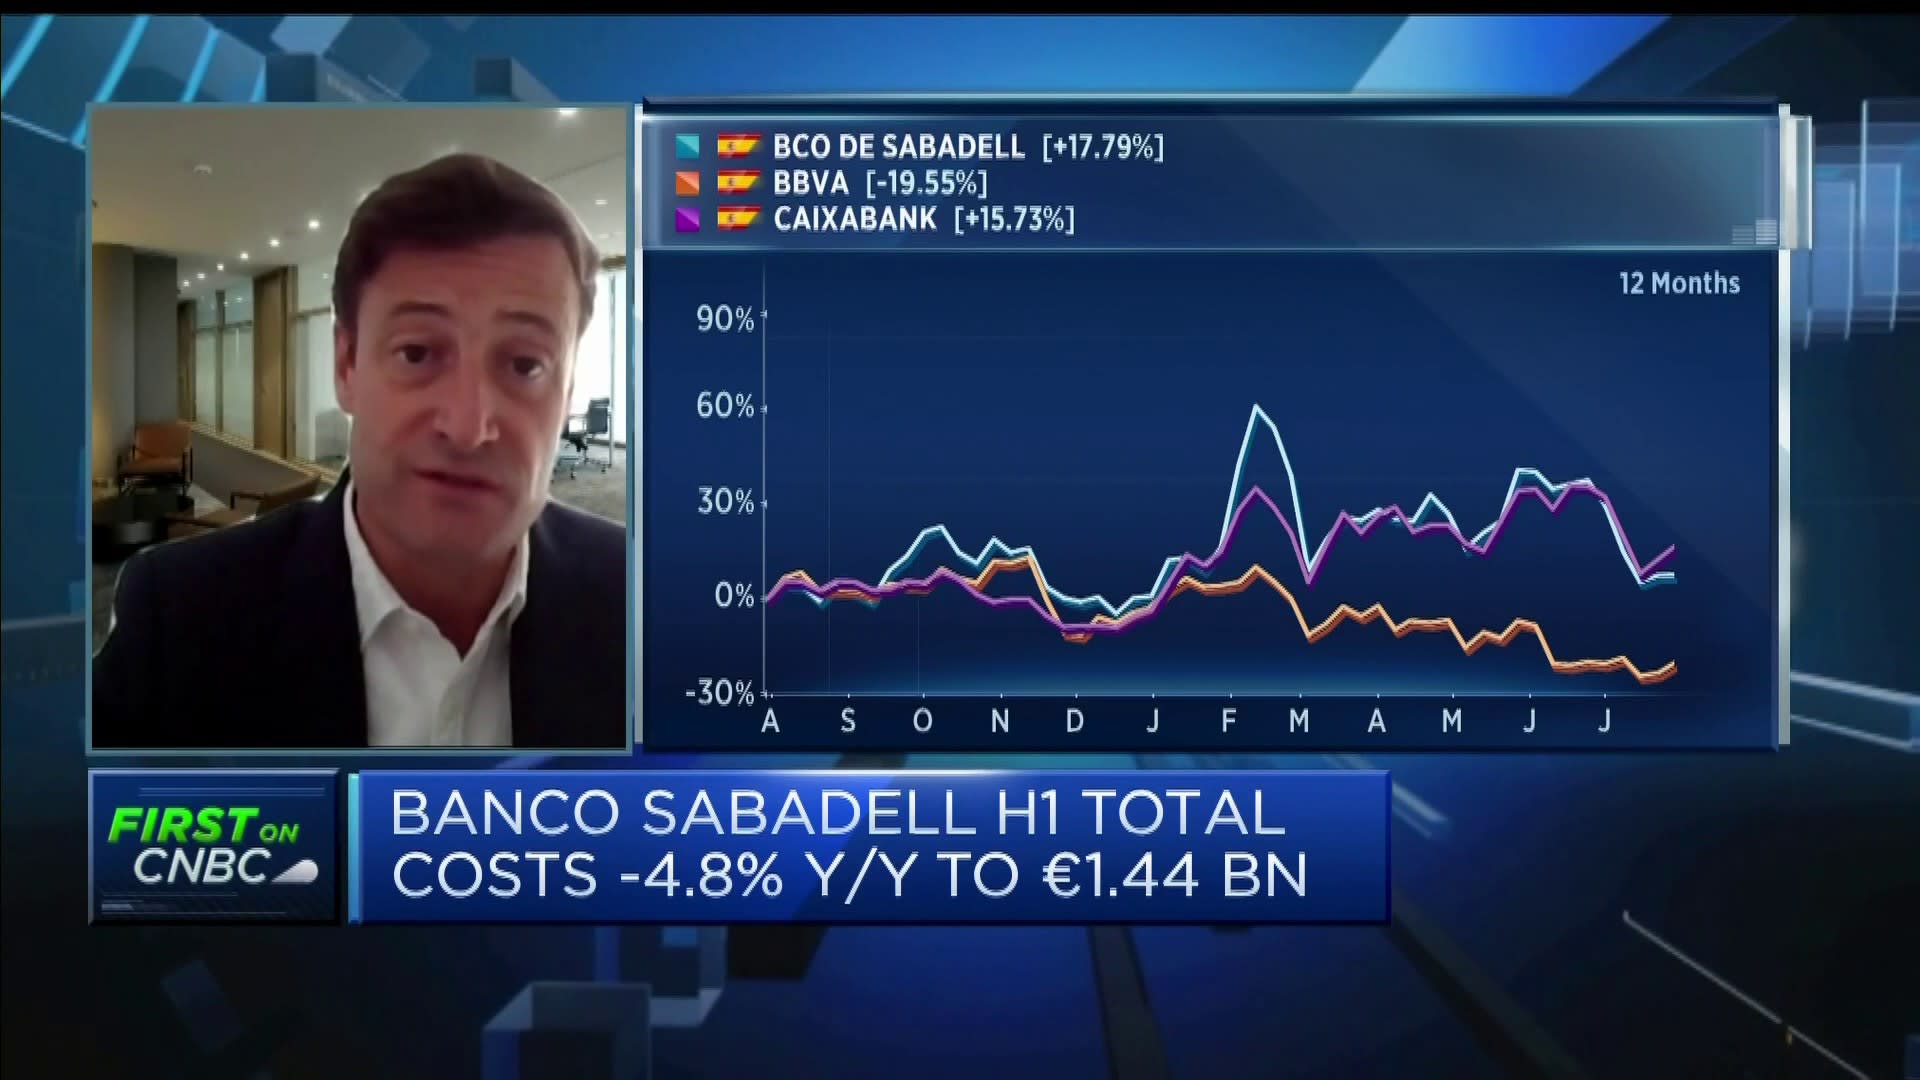 Banco Sabadell CFO discusses the impact of higher interest rates